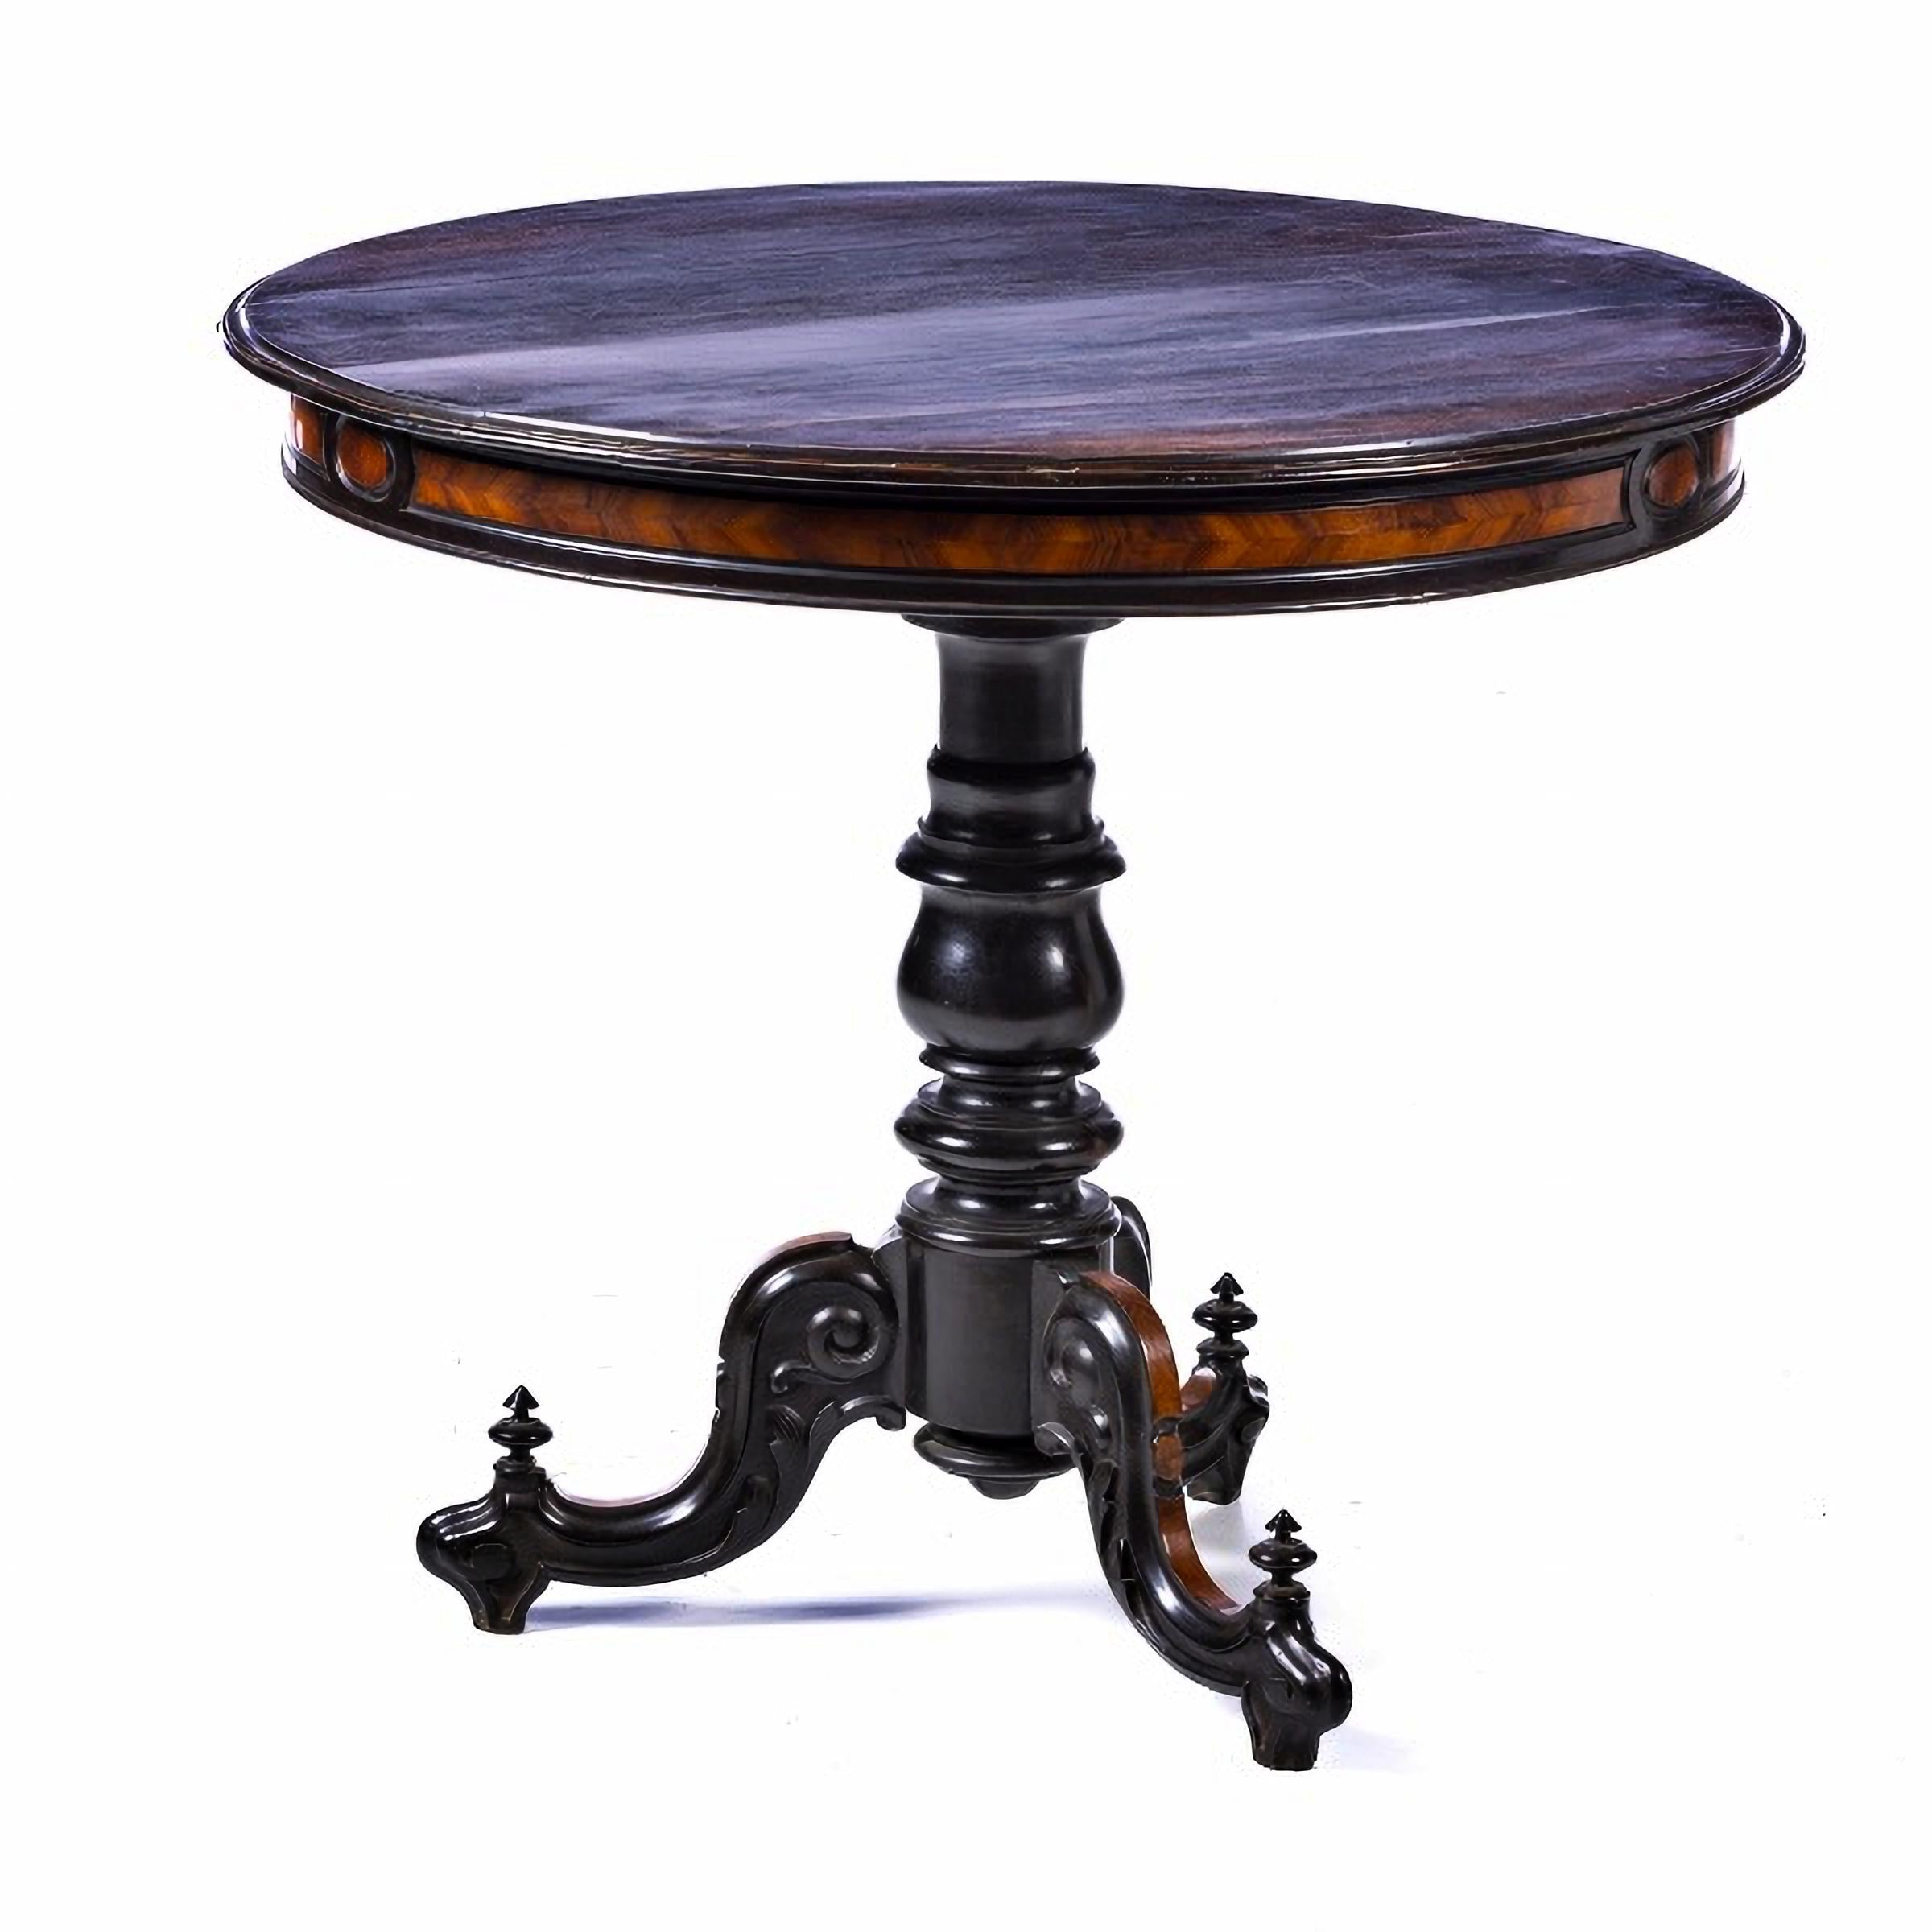 ENGLISH ROMANTIC CENTER TABLE 19th Century

in carved rosewood, circular shaped top resting on a turned central column leg, ending in three curved feet. 
Dim.: 78 x 88 x 88 cm.
good conditions